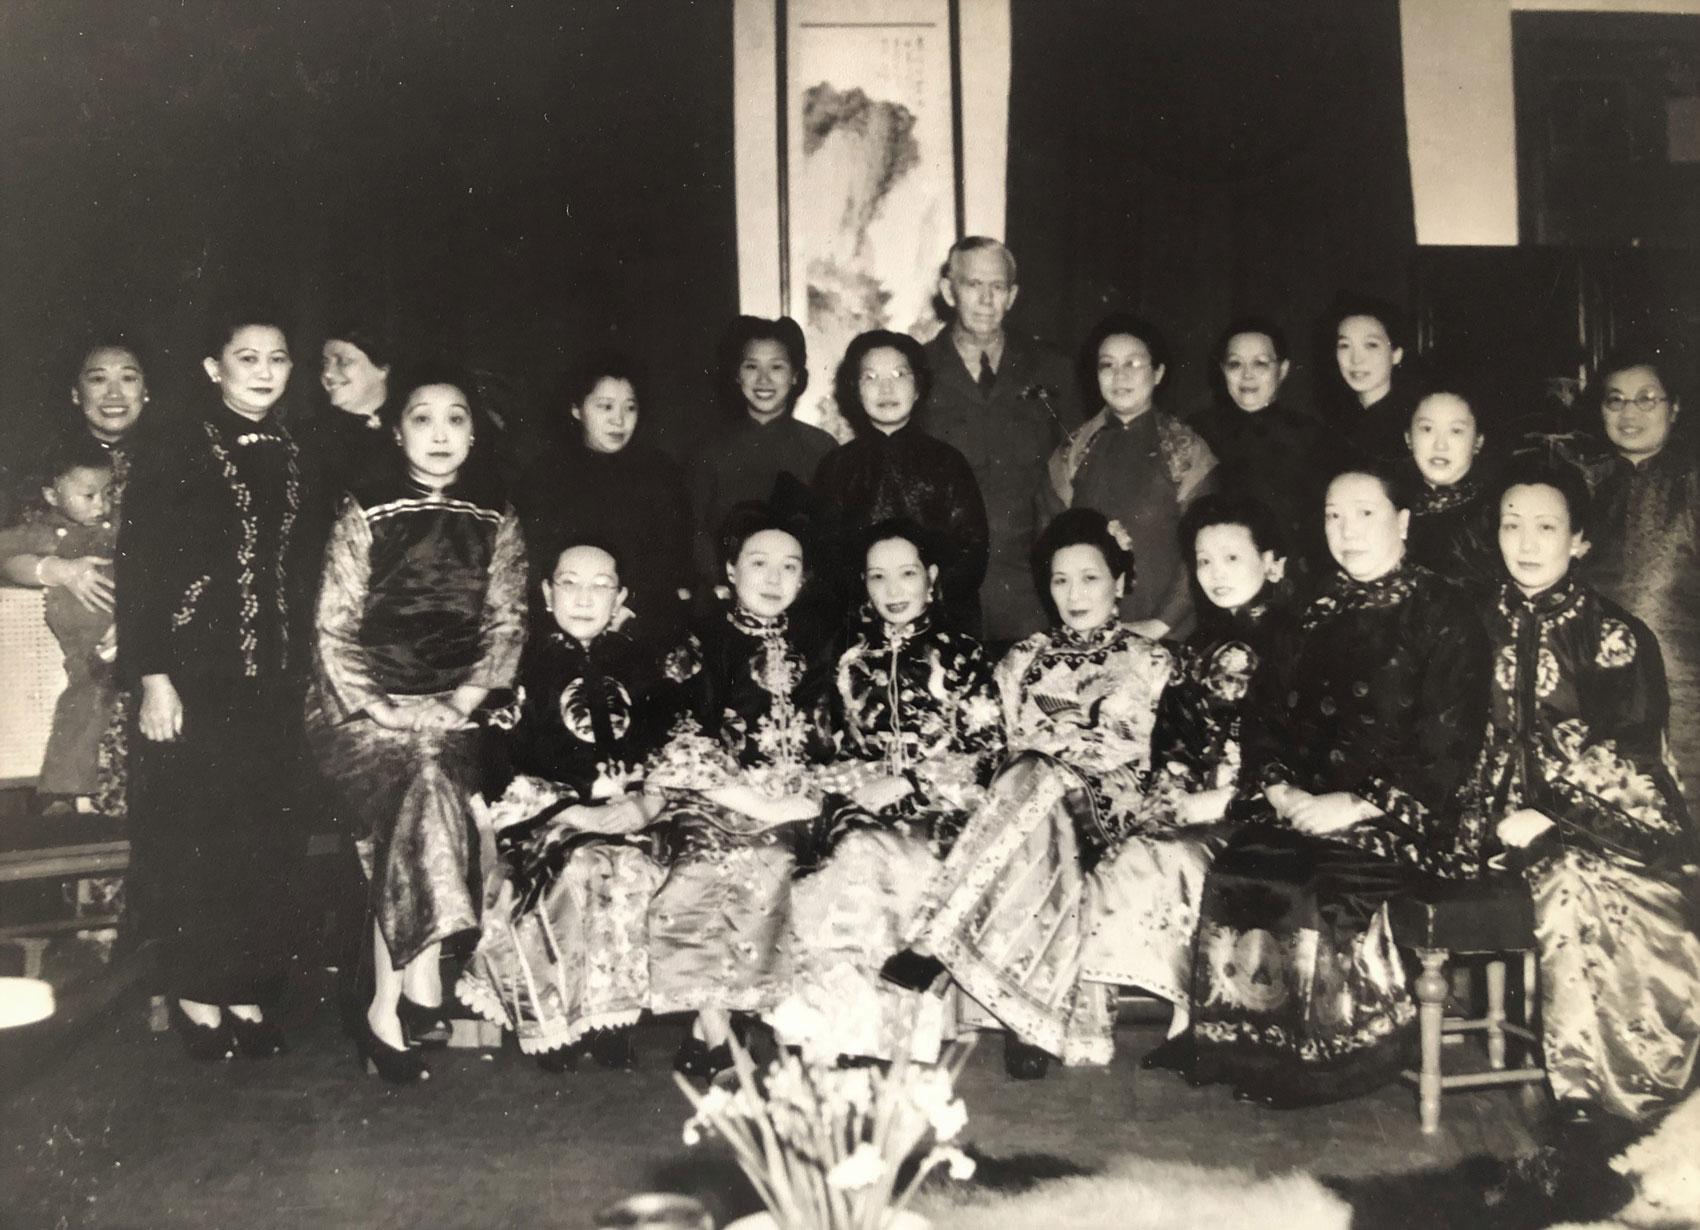 Black and white photo of a group of women and one made dressed for a Christmas holiday group photo